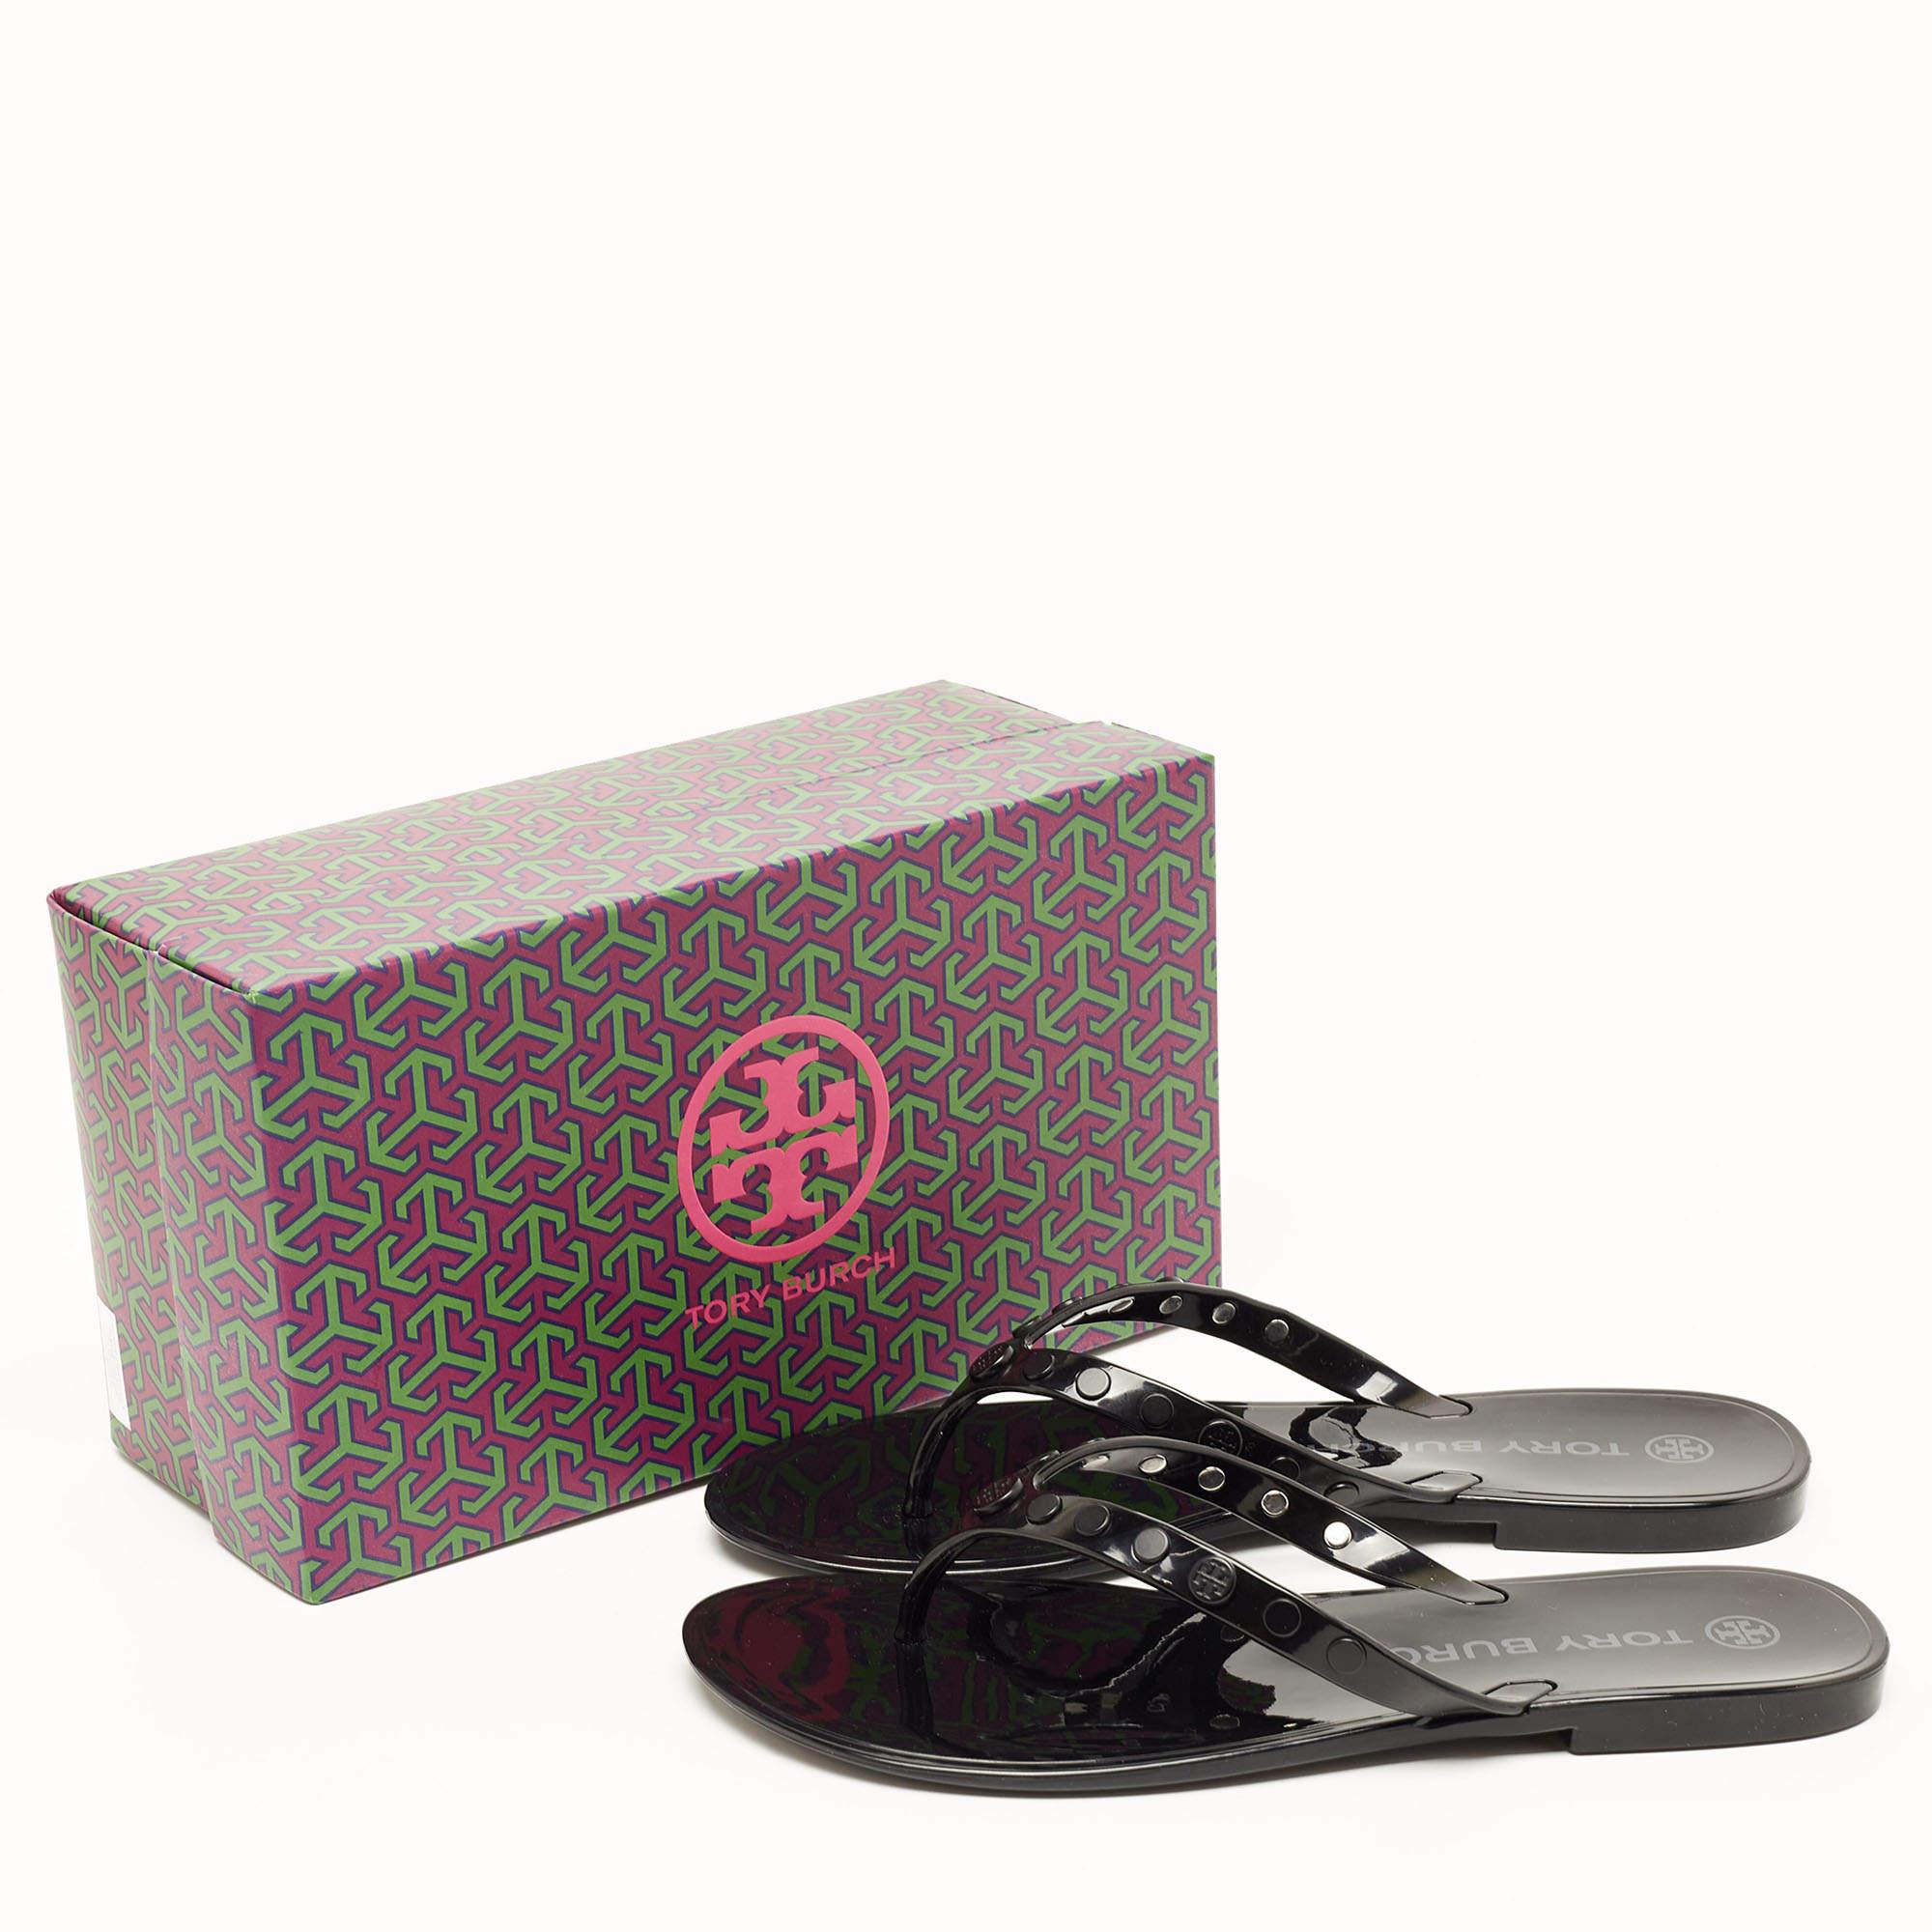 Tory Burch Black Rubber Studded Thong Flats Size 38.5 5